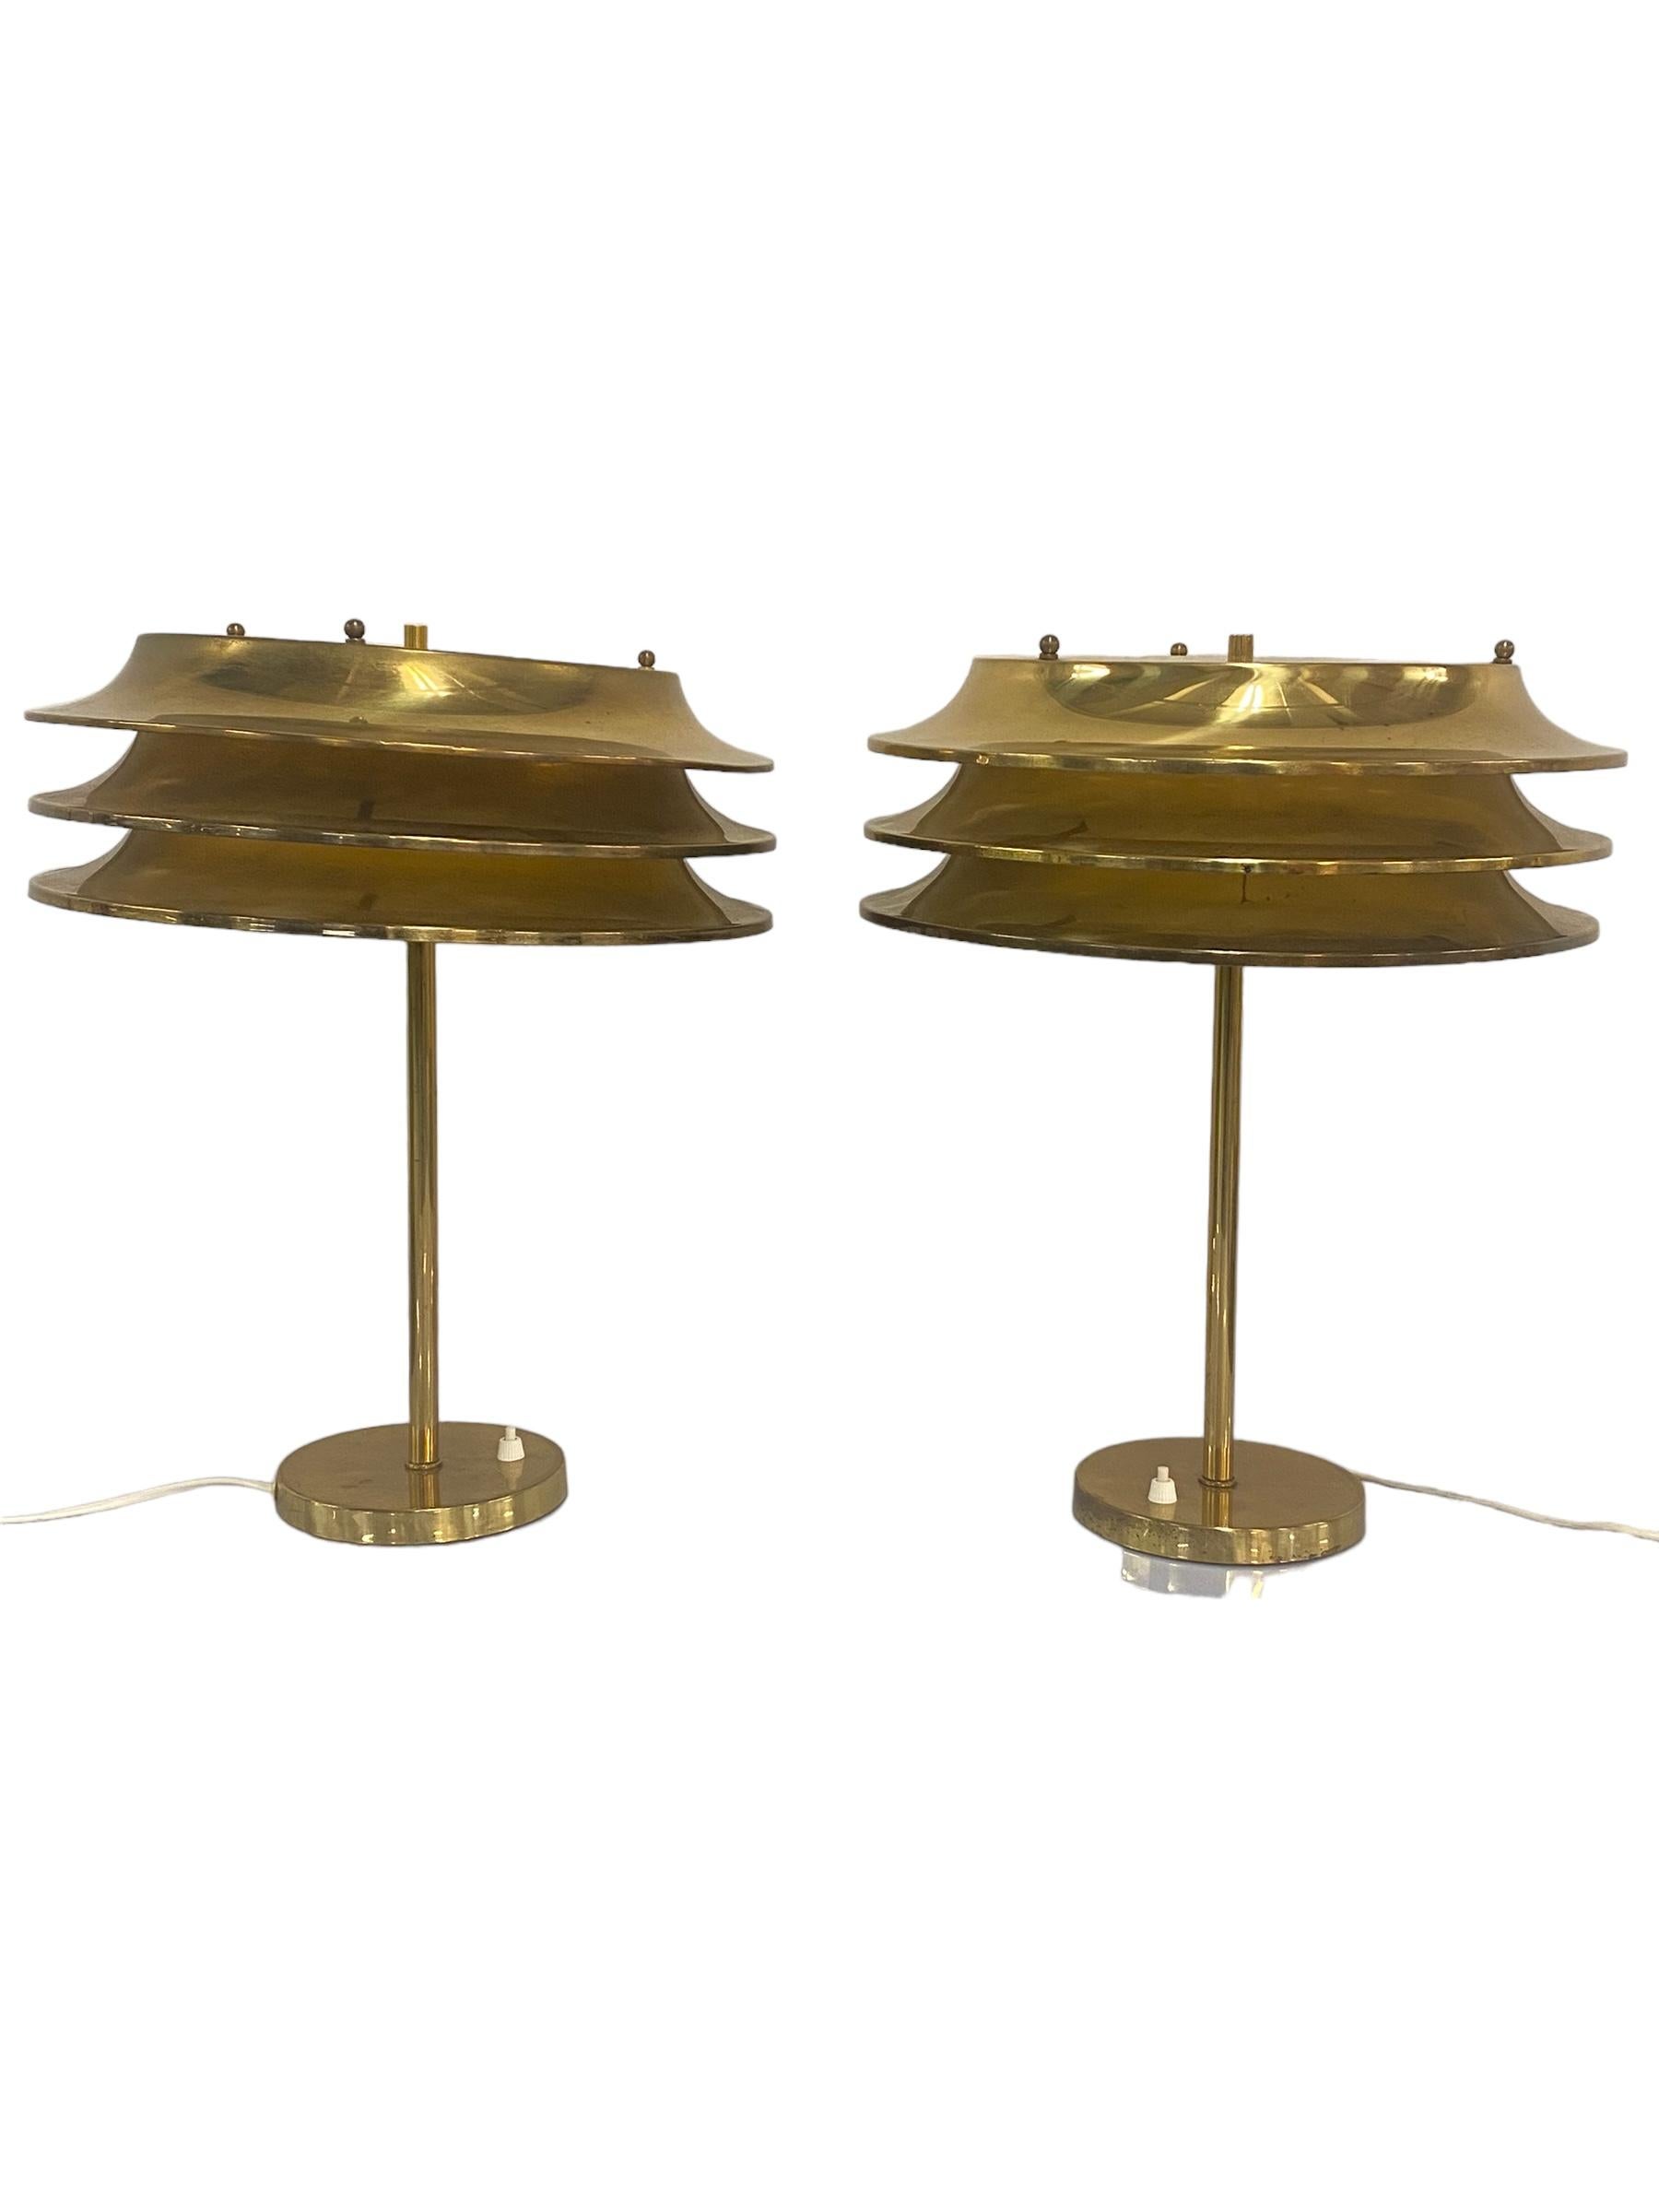 A Pair of Kai Ruokonen 'Finnmark' Table Lamps for the Vaakuna Hotel, Lynx, 1970s For Sale 7